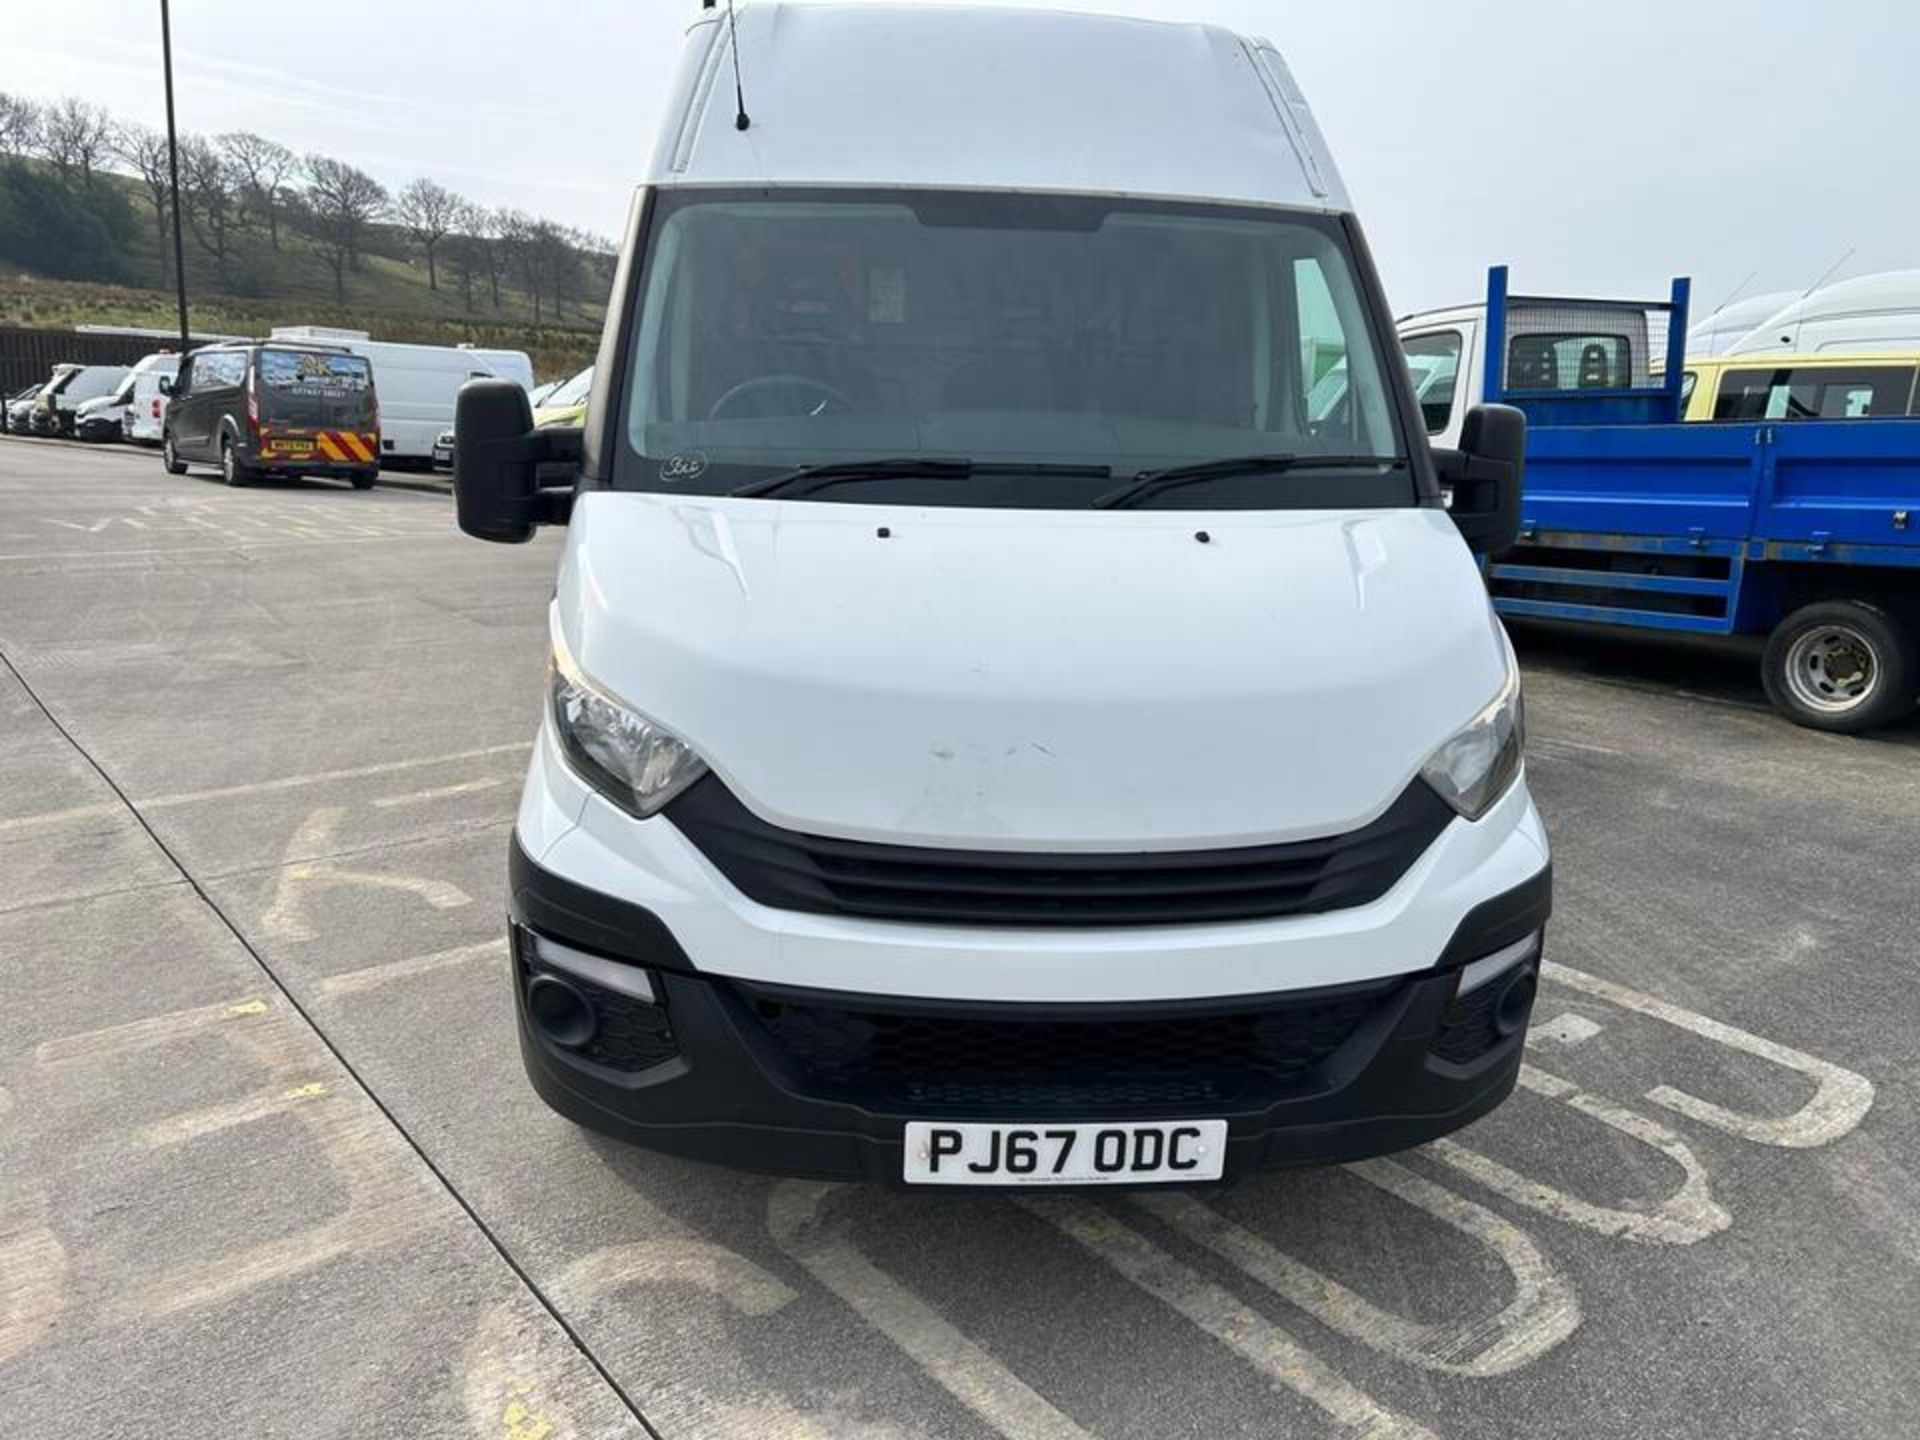 2017 IVECO DAILY -123K MILES - HPI CLEAR- READY TO WORK!